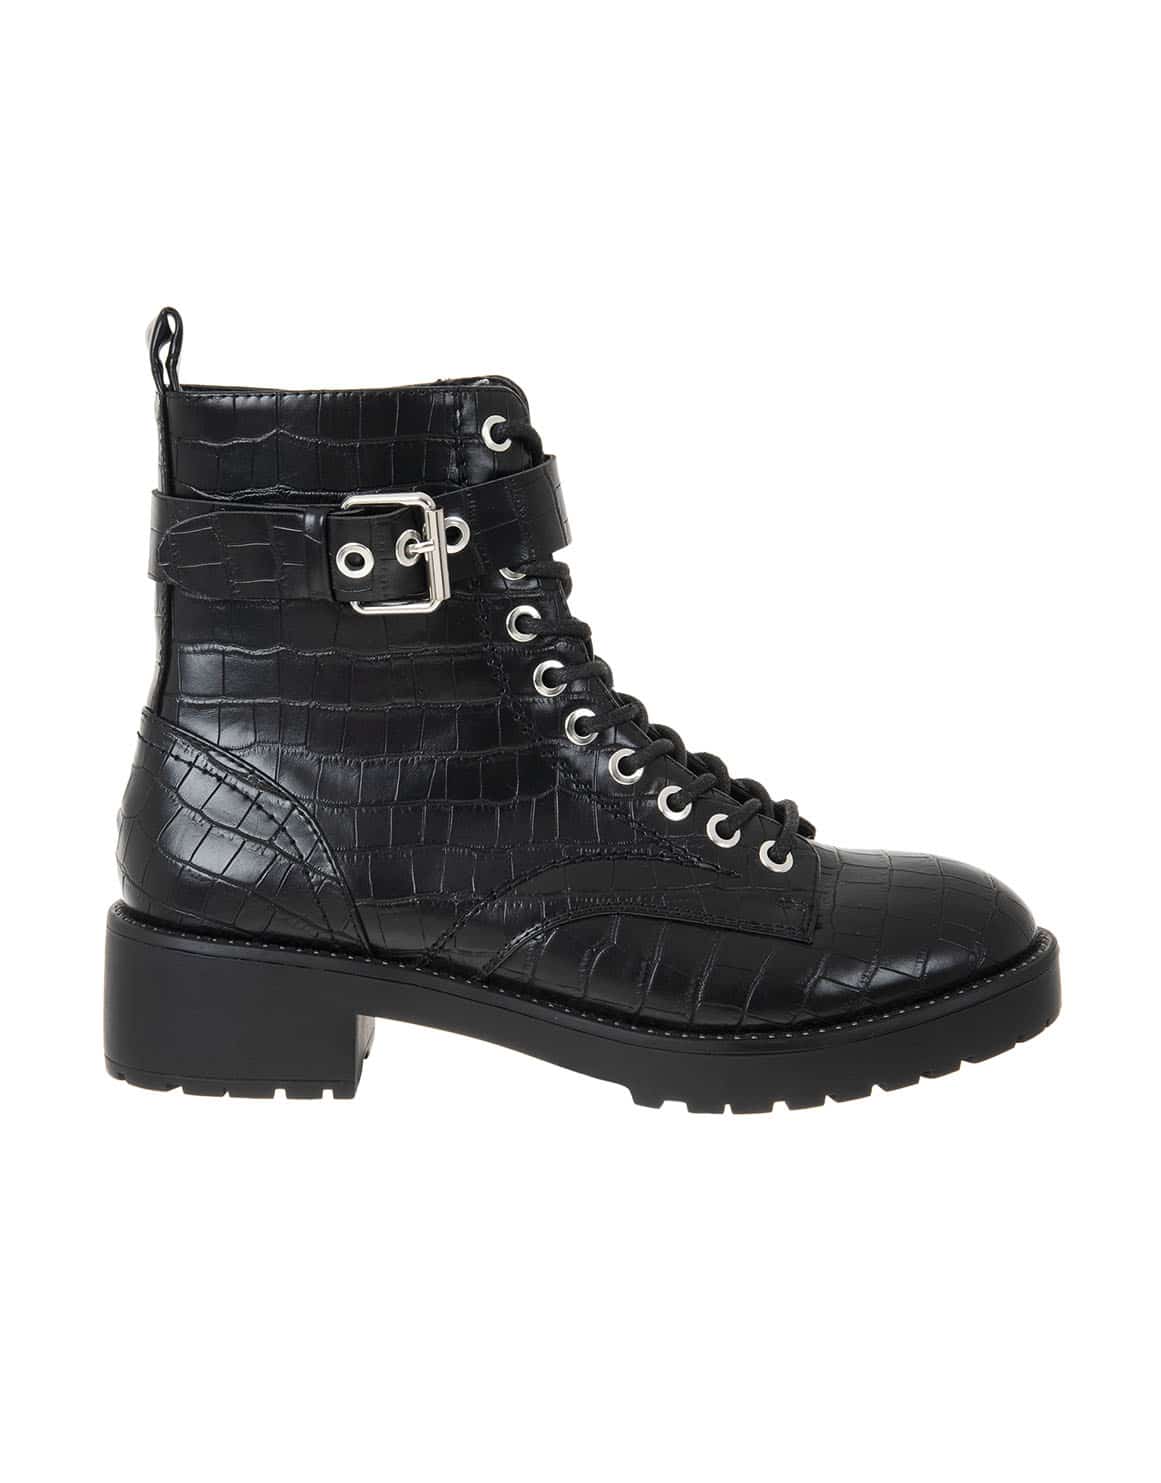 W21 CROC COMBAT BOOT - Woolworths Mauritius Online